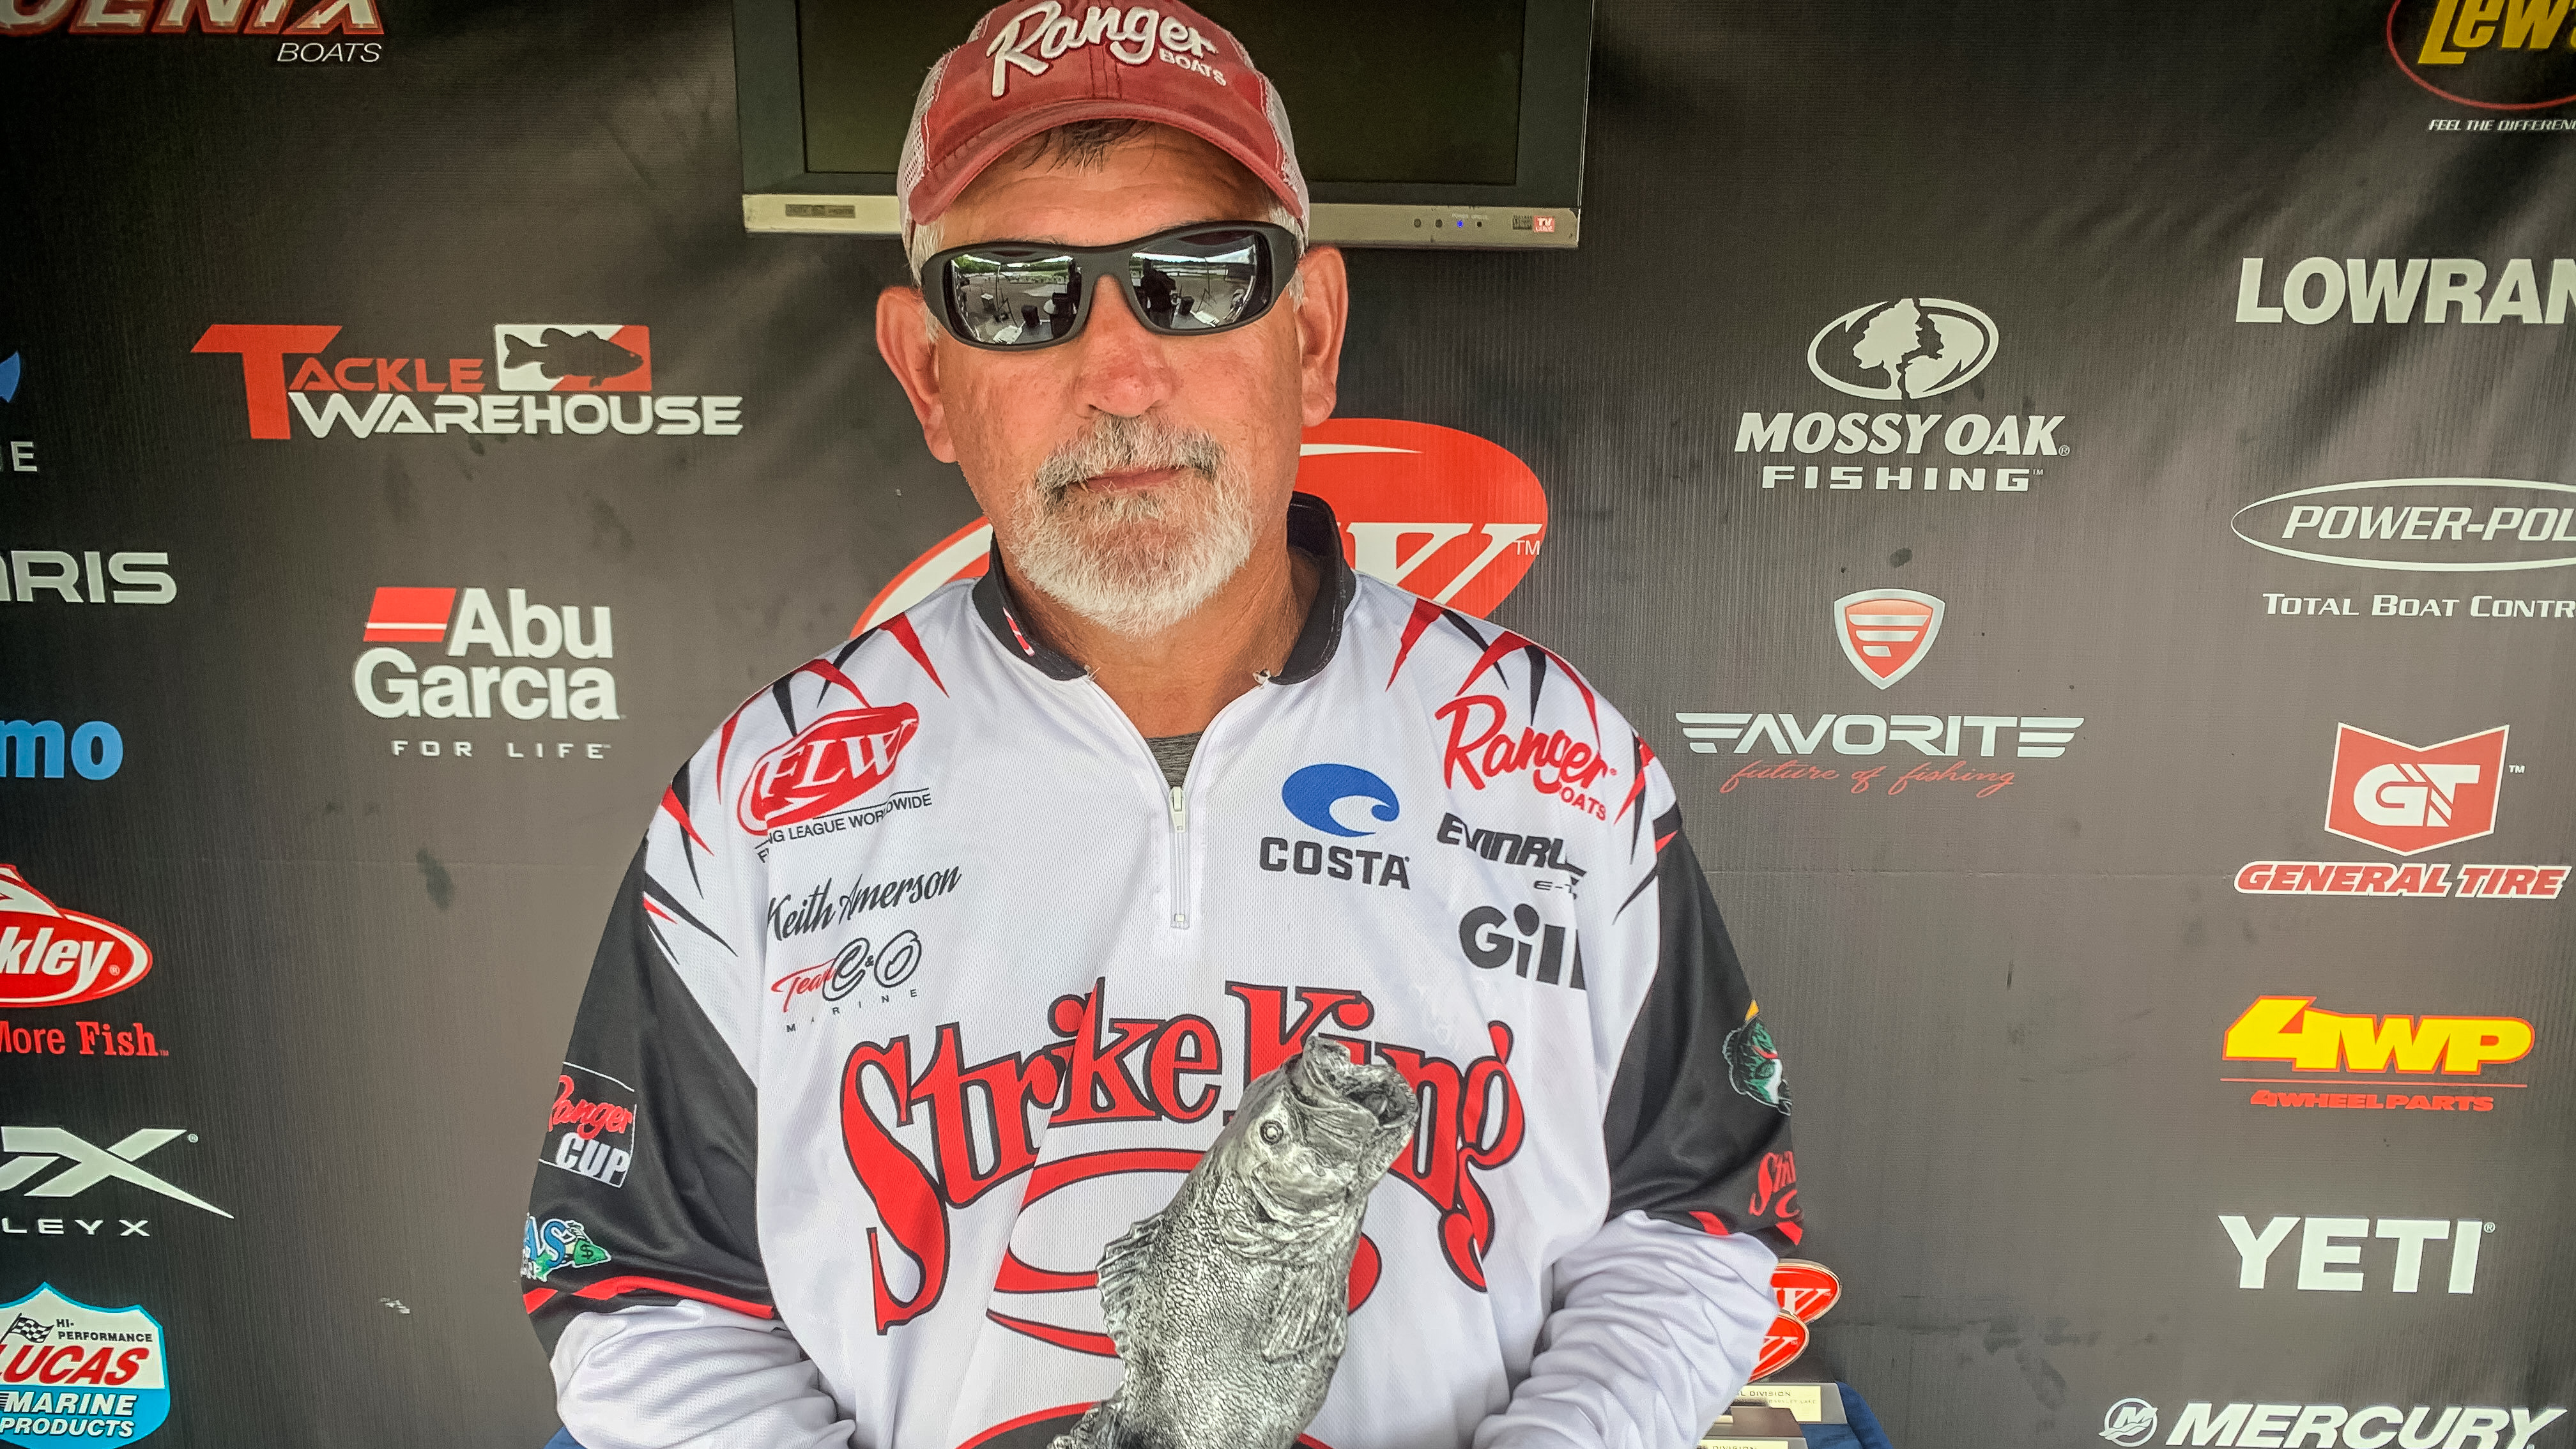 Amerson Wins First BFL - Major League Fishing